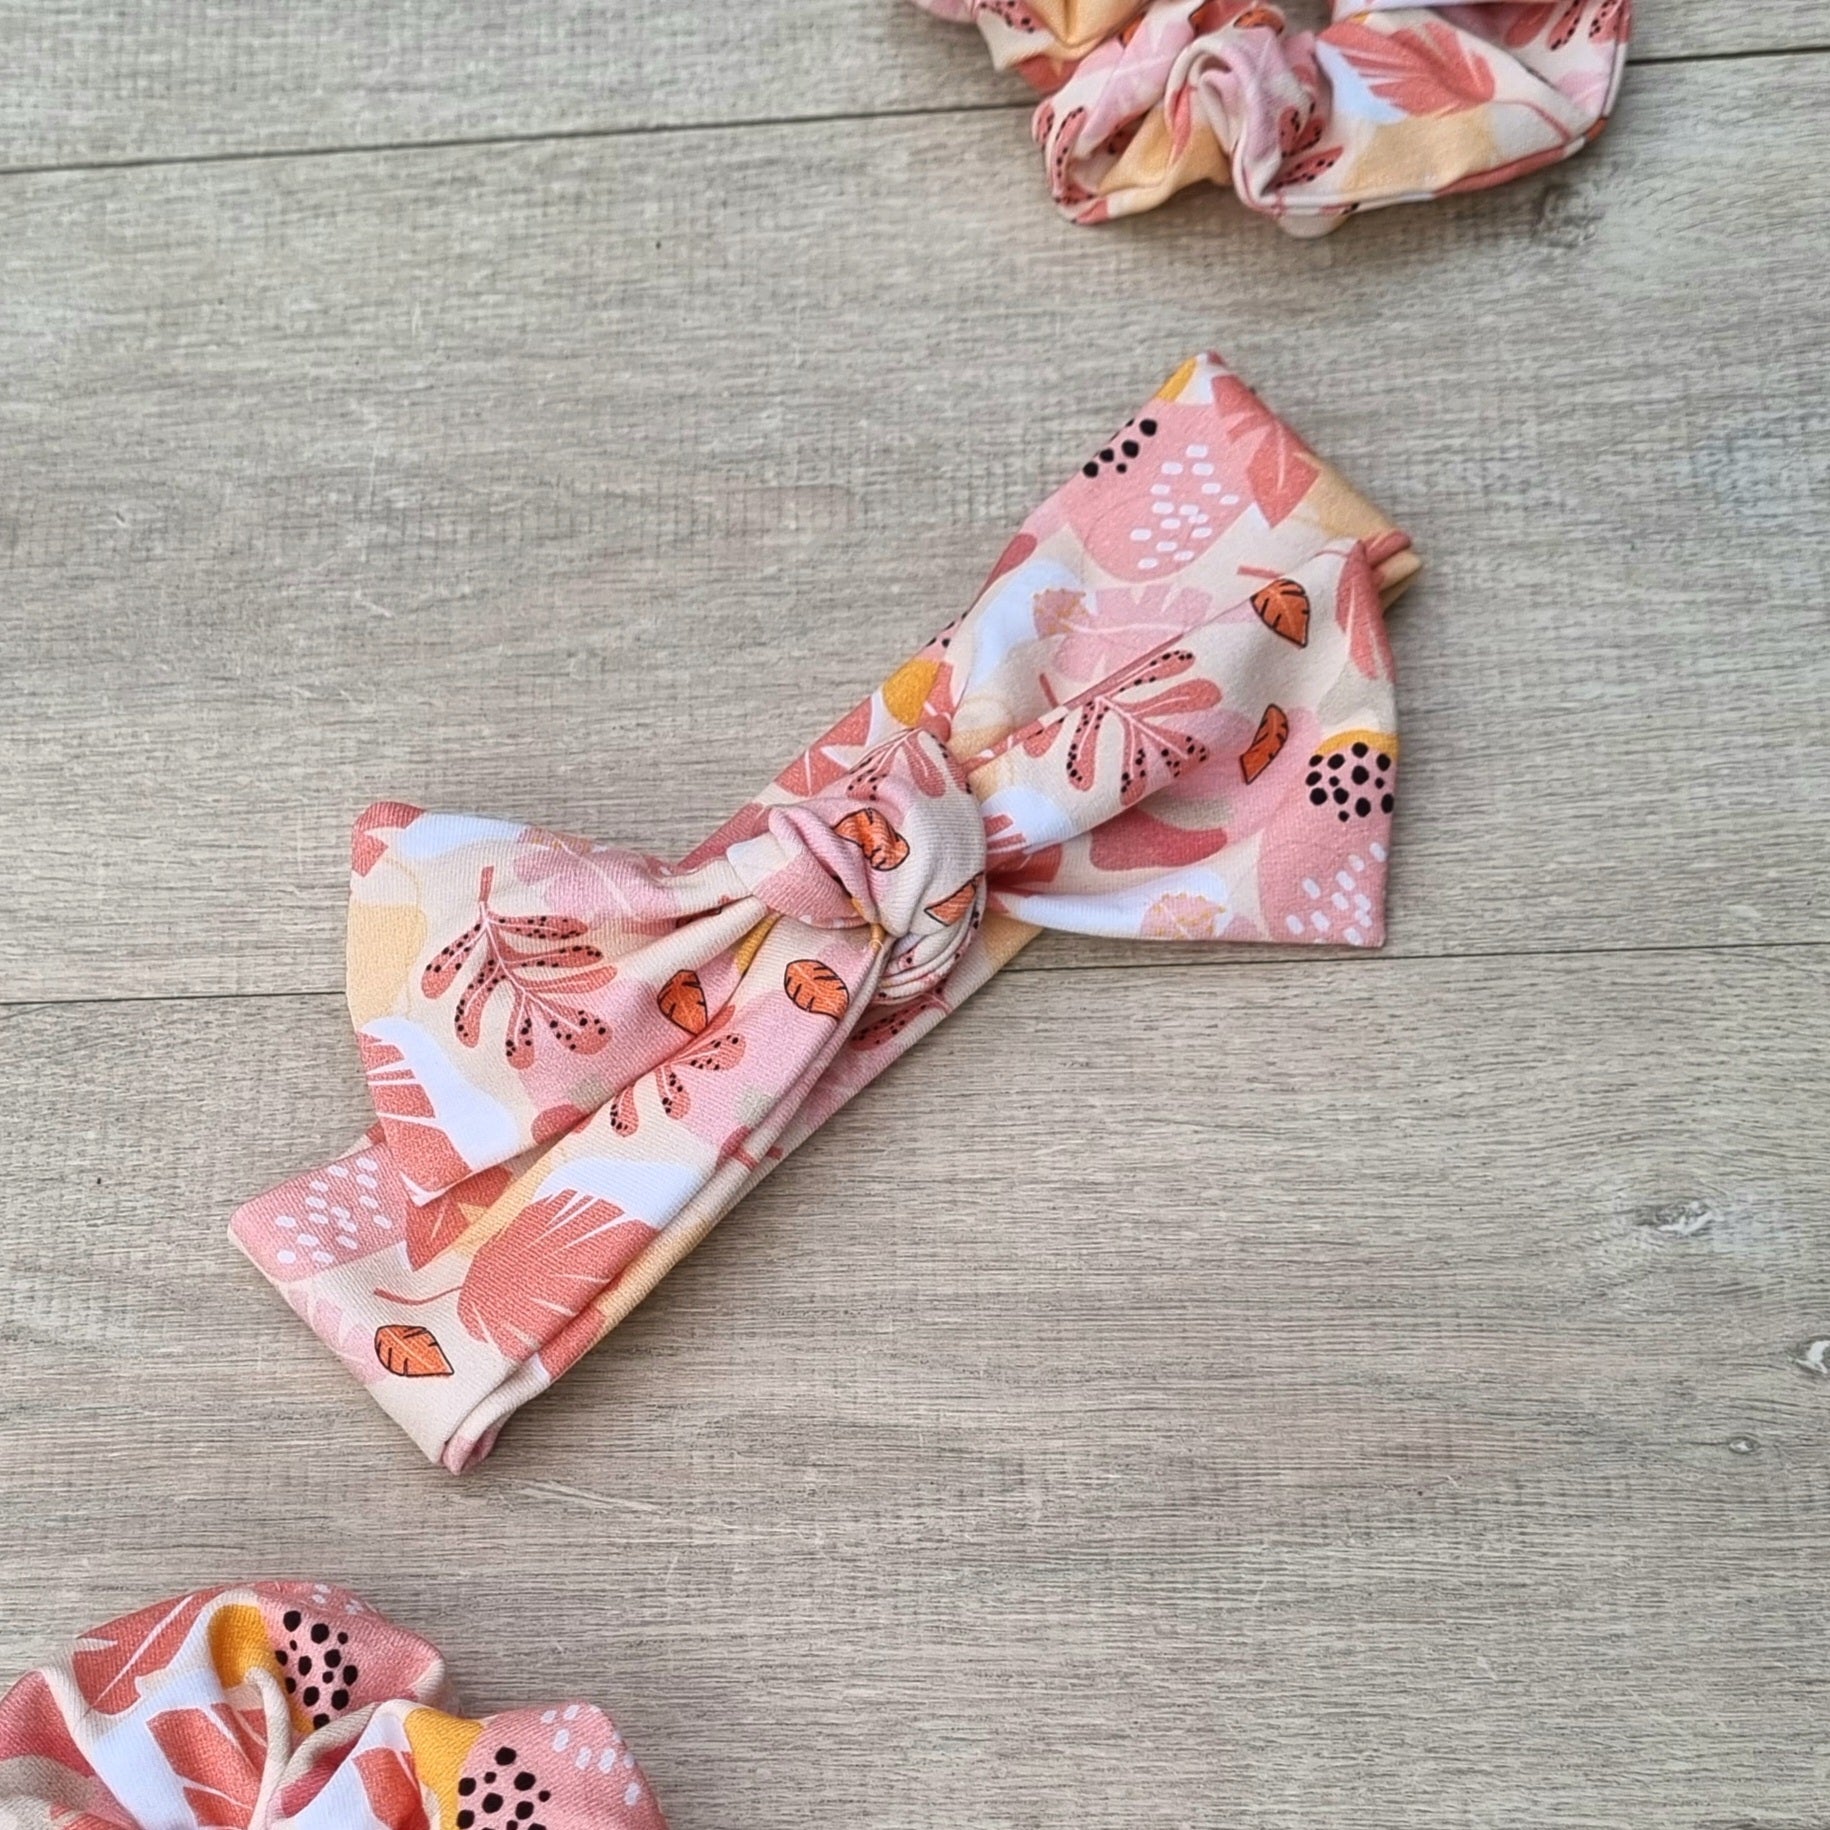 Top Knot Headband - Sara against wooden backdrop. Pink and orange leaves on white background.